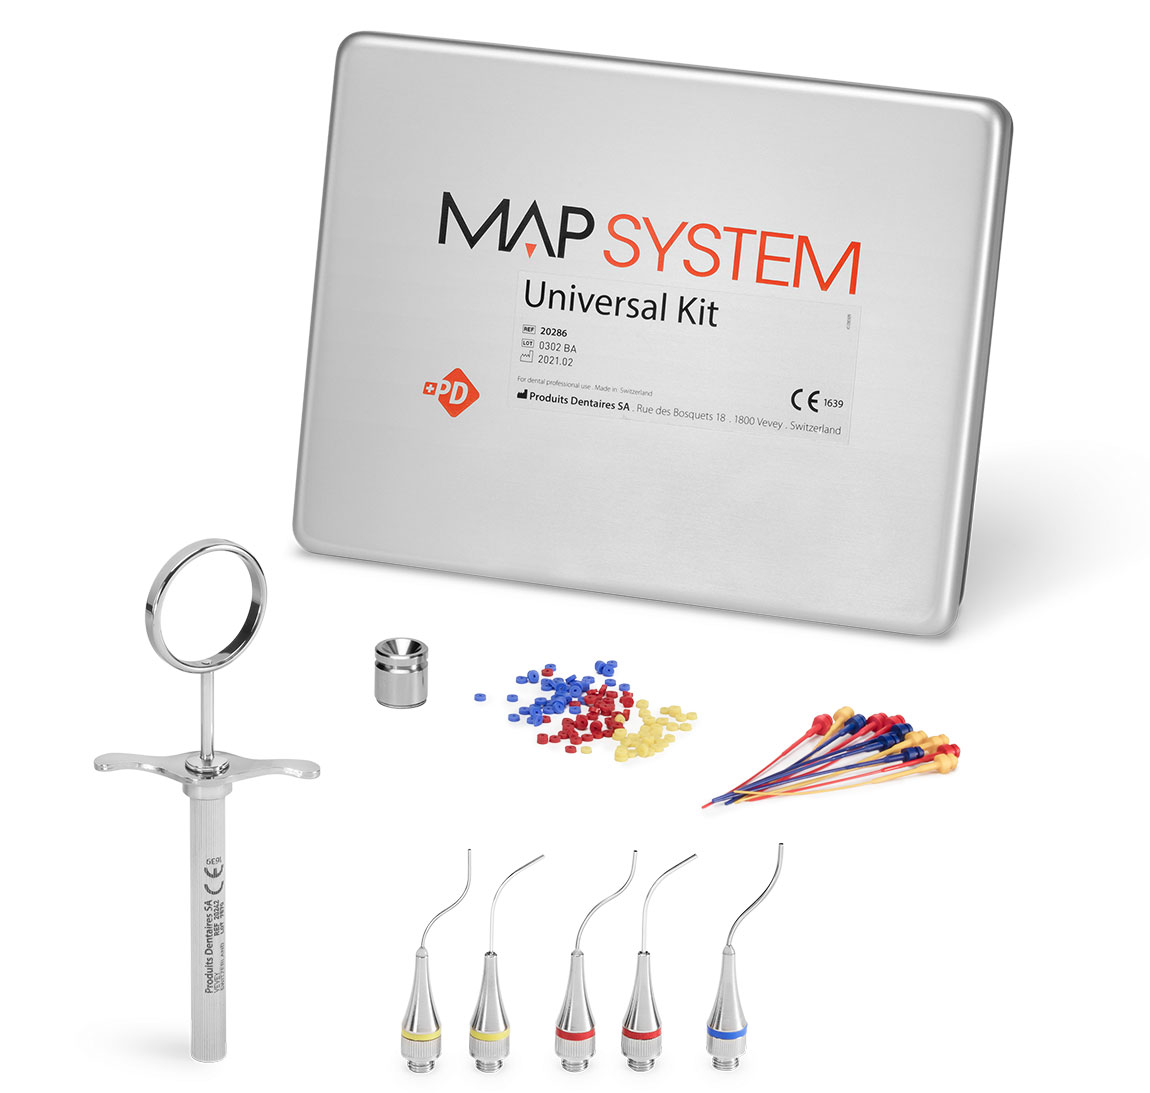 Buy MAP System Universal kit products: endodontic heads for placing cements in root canals